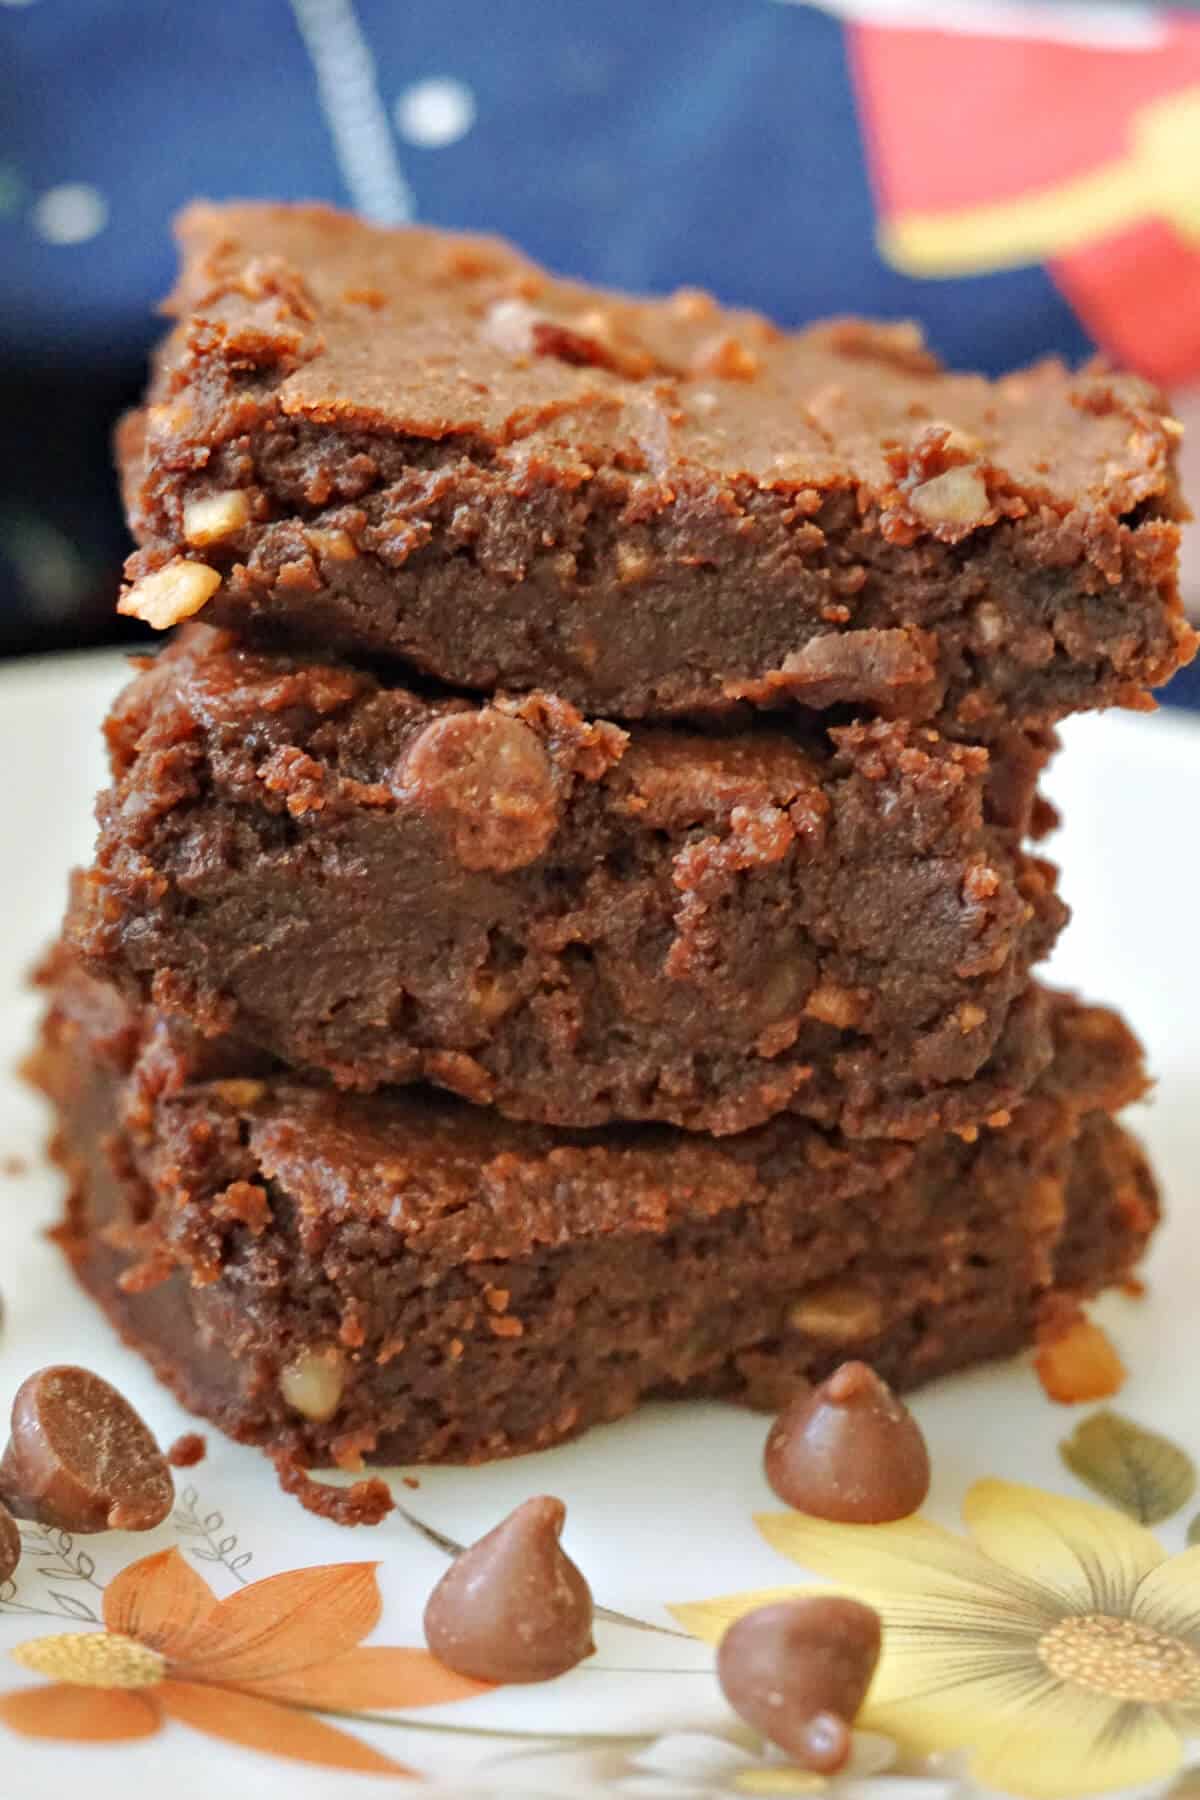 A stack of 3 brownies on a plate.